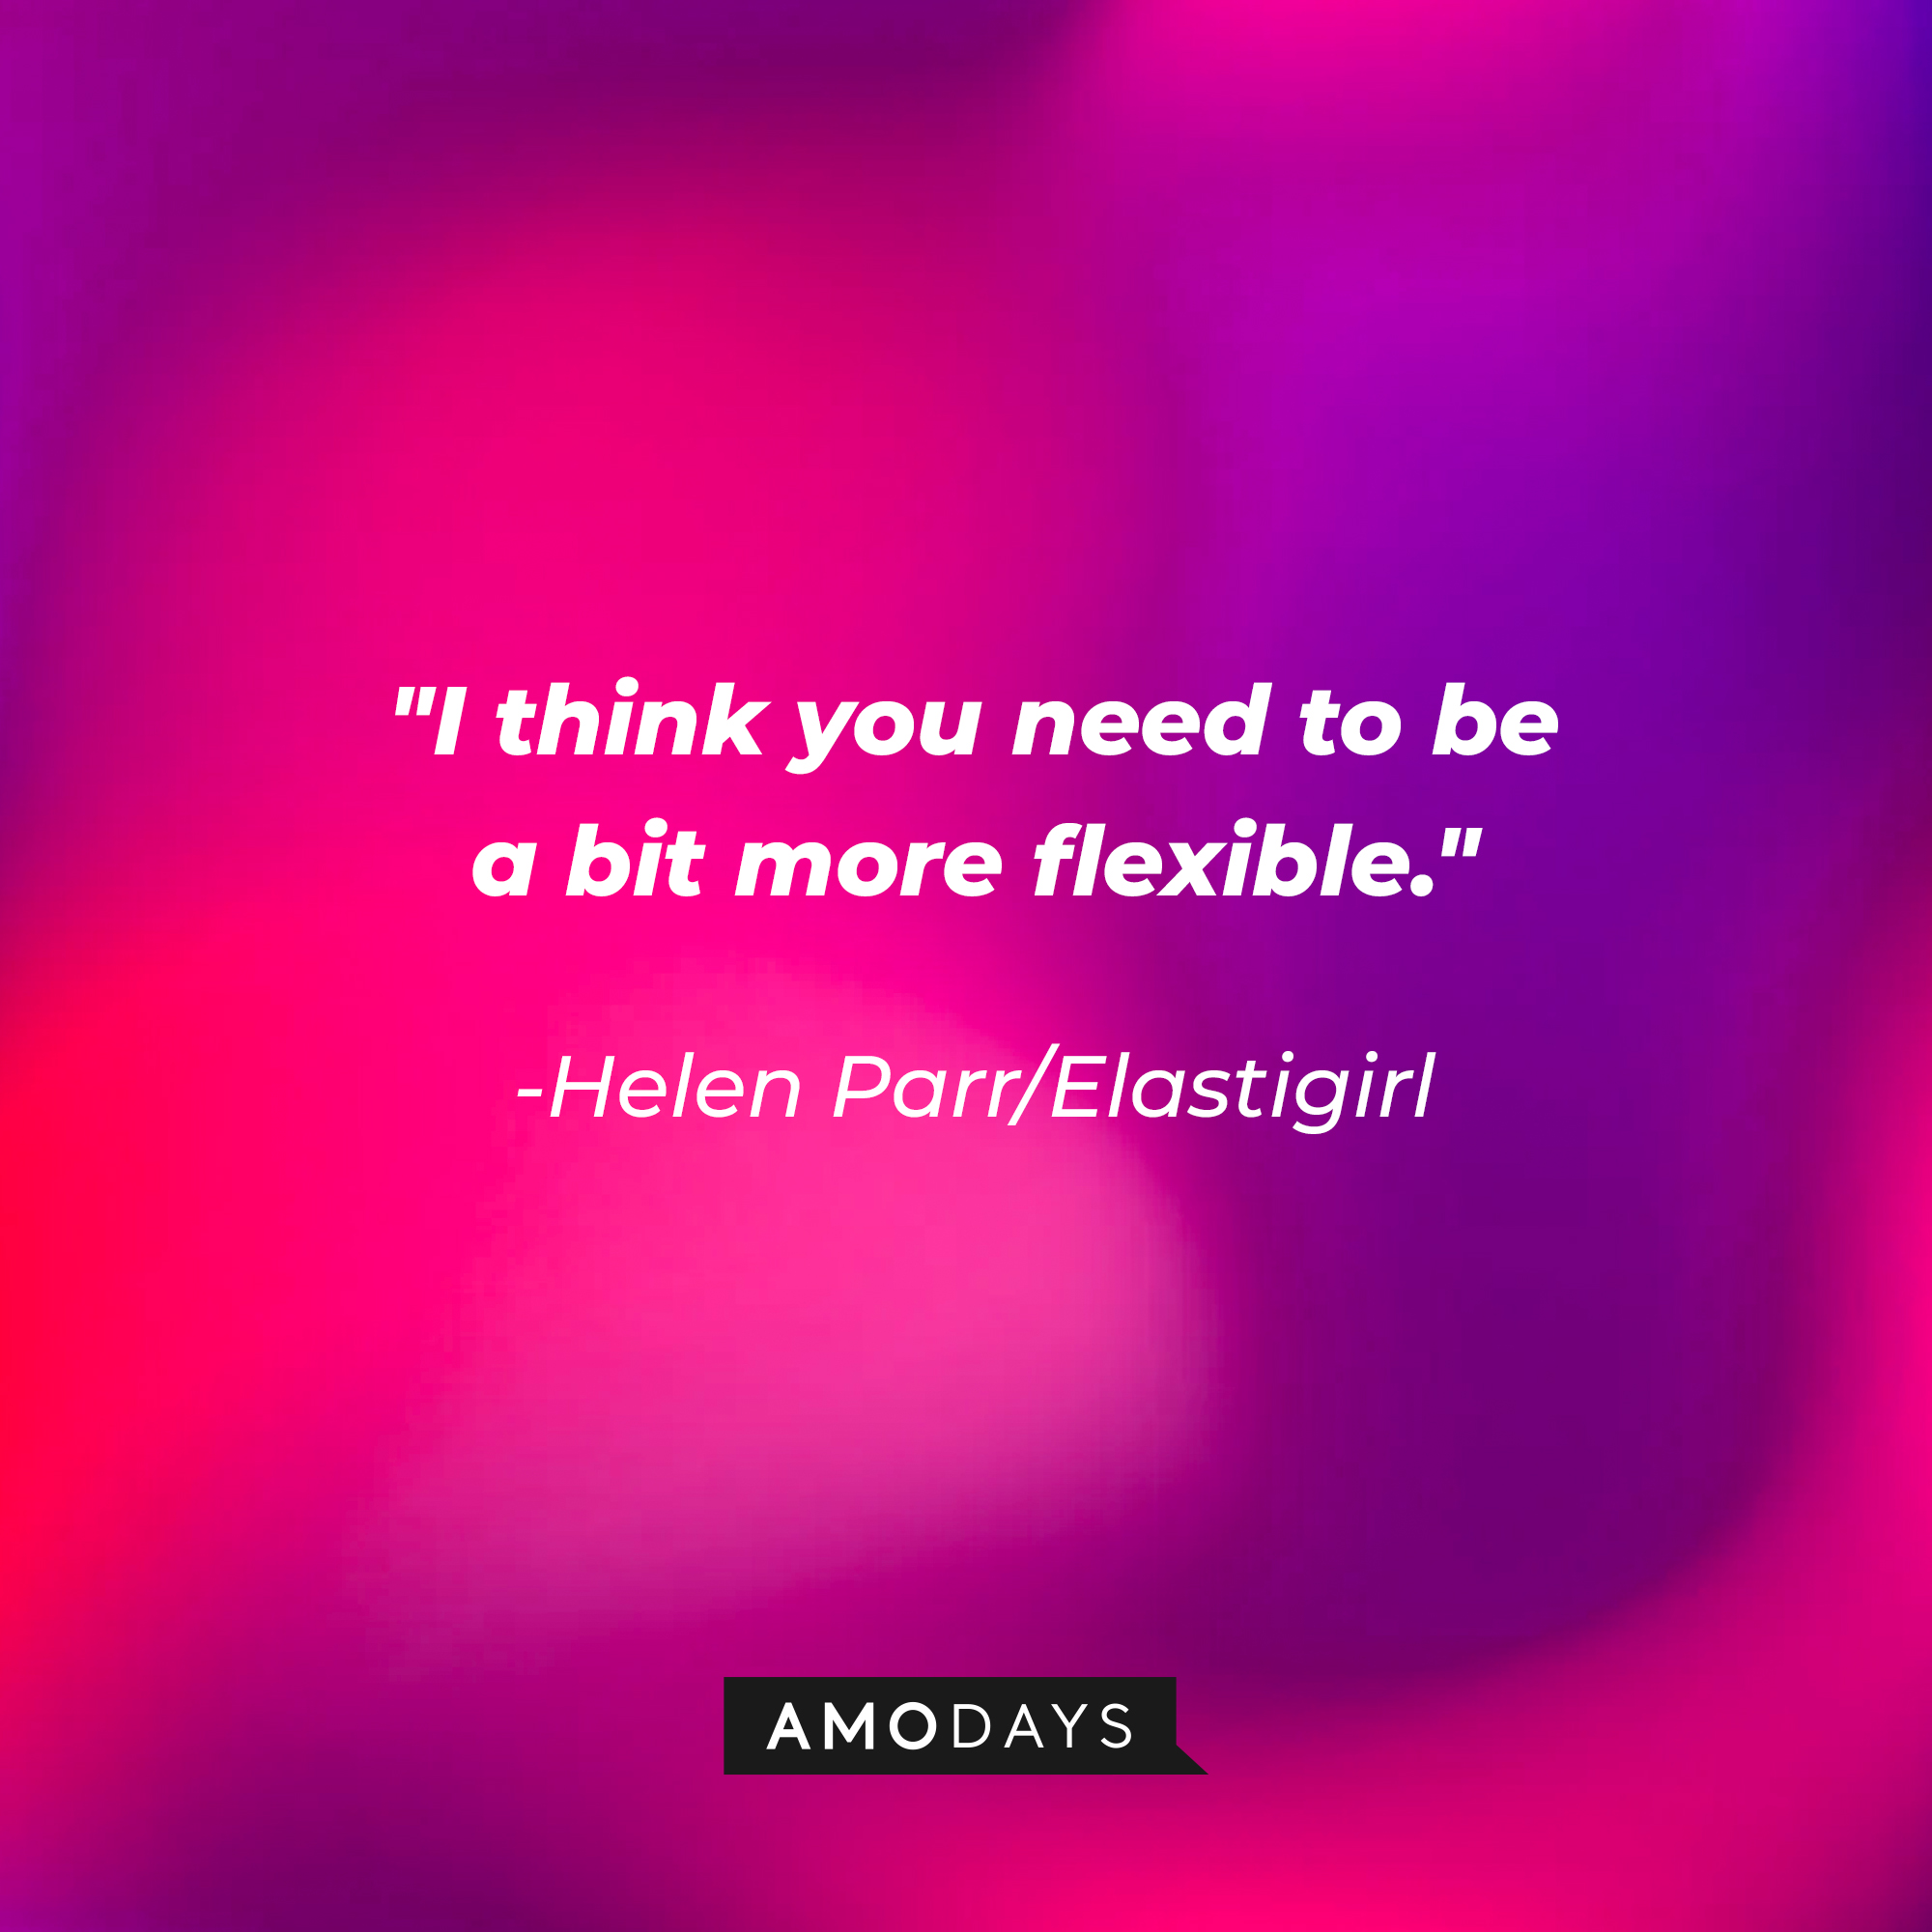 Helen Parr/Elastigirl's quote: "I think you need to be a bit more flexible"  | Source: Amodays